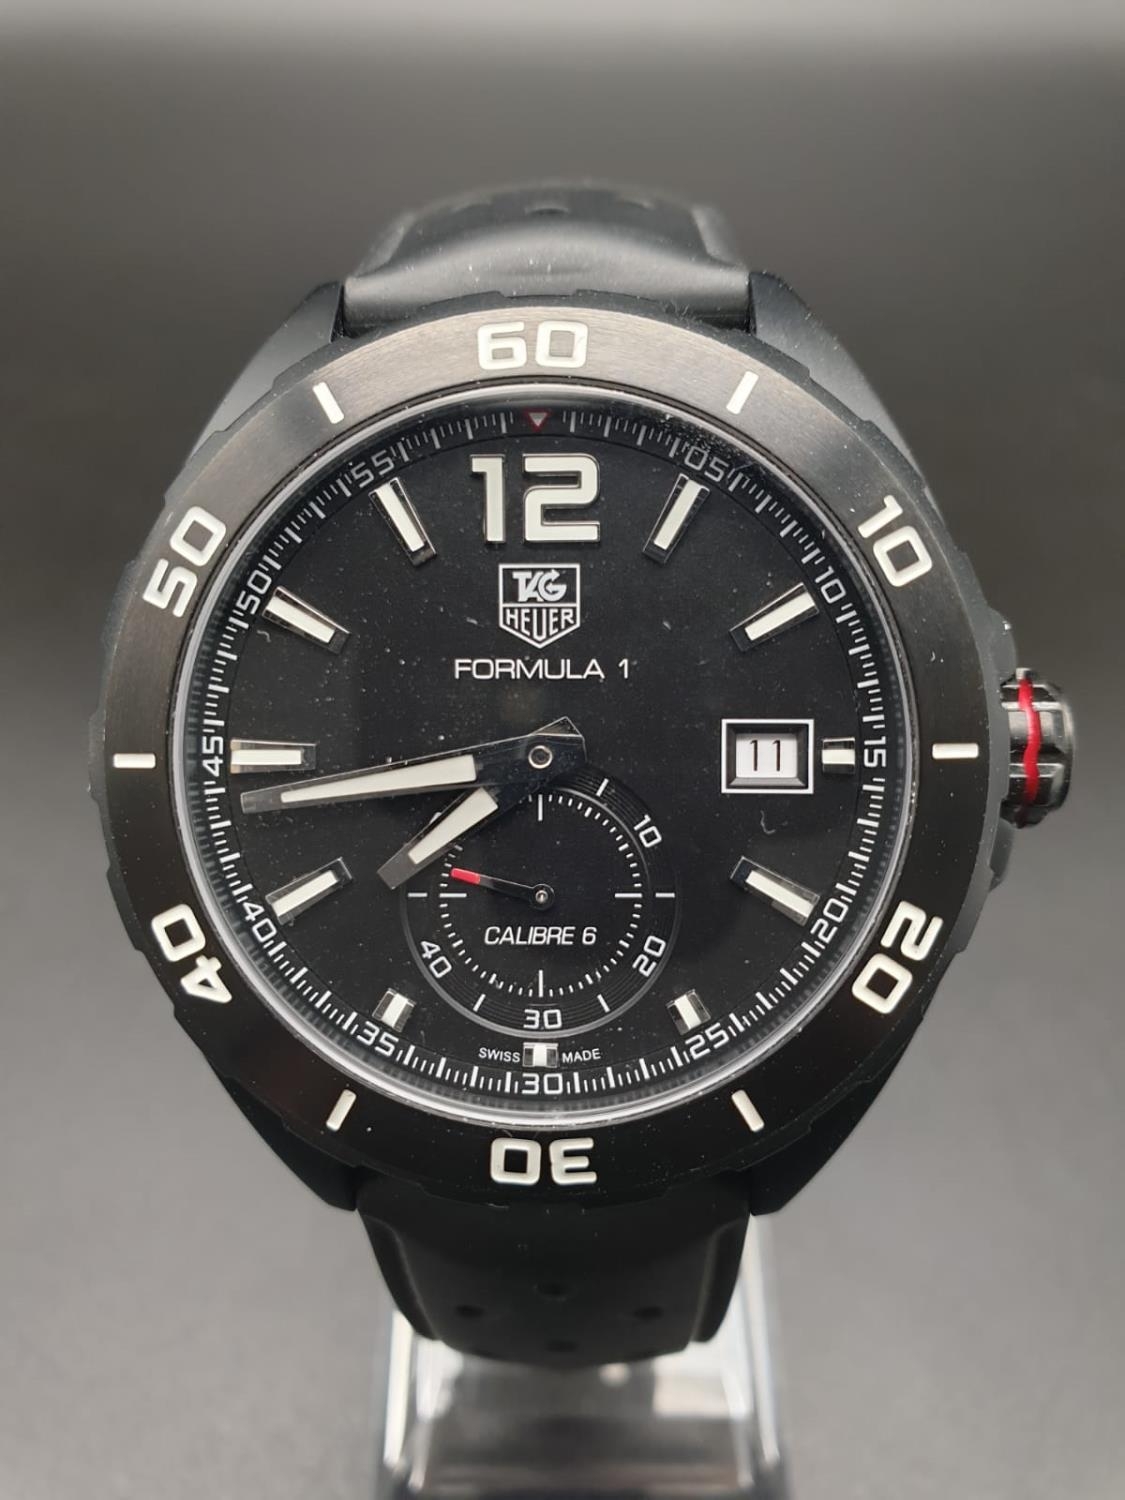 Tag Heuer Formula 1 watch black face and strap, 42mm